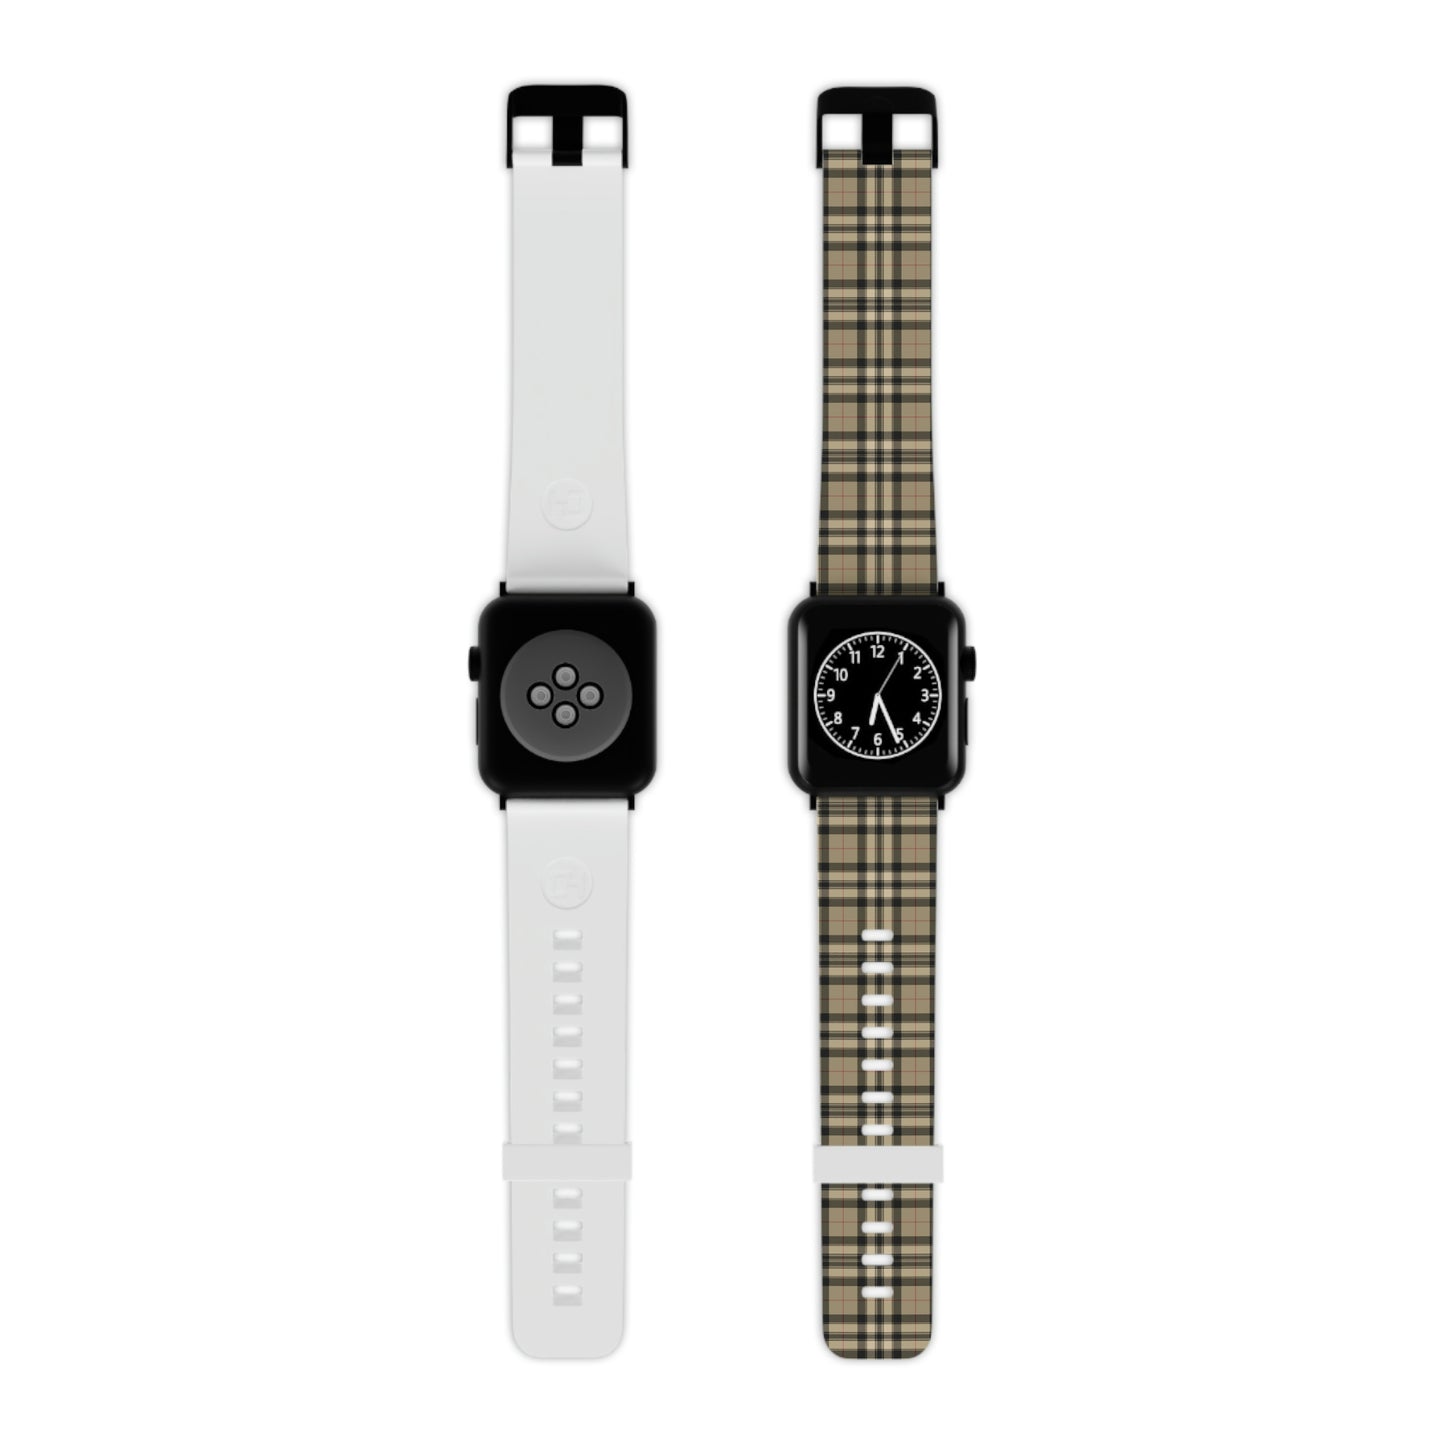 Tan and Black Plaid Thermo Elastomer Watch Band for Apple Watch